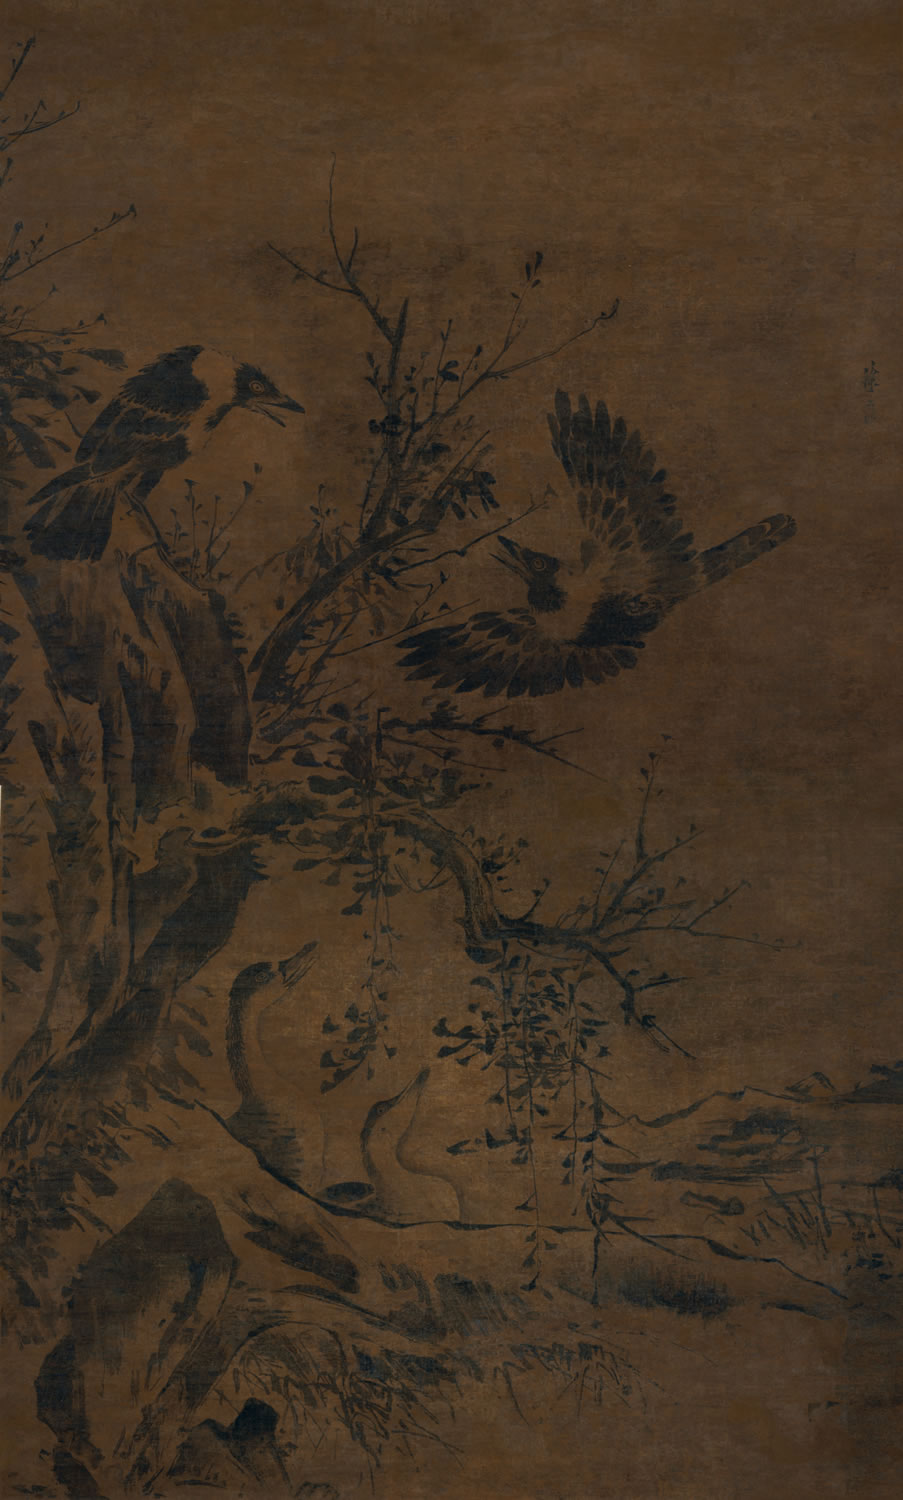 Xubaizhai Collection of Chinese Painting and Calligraphy